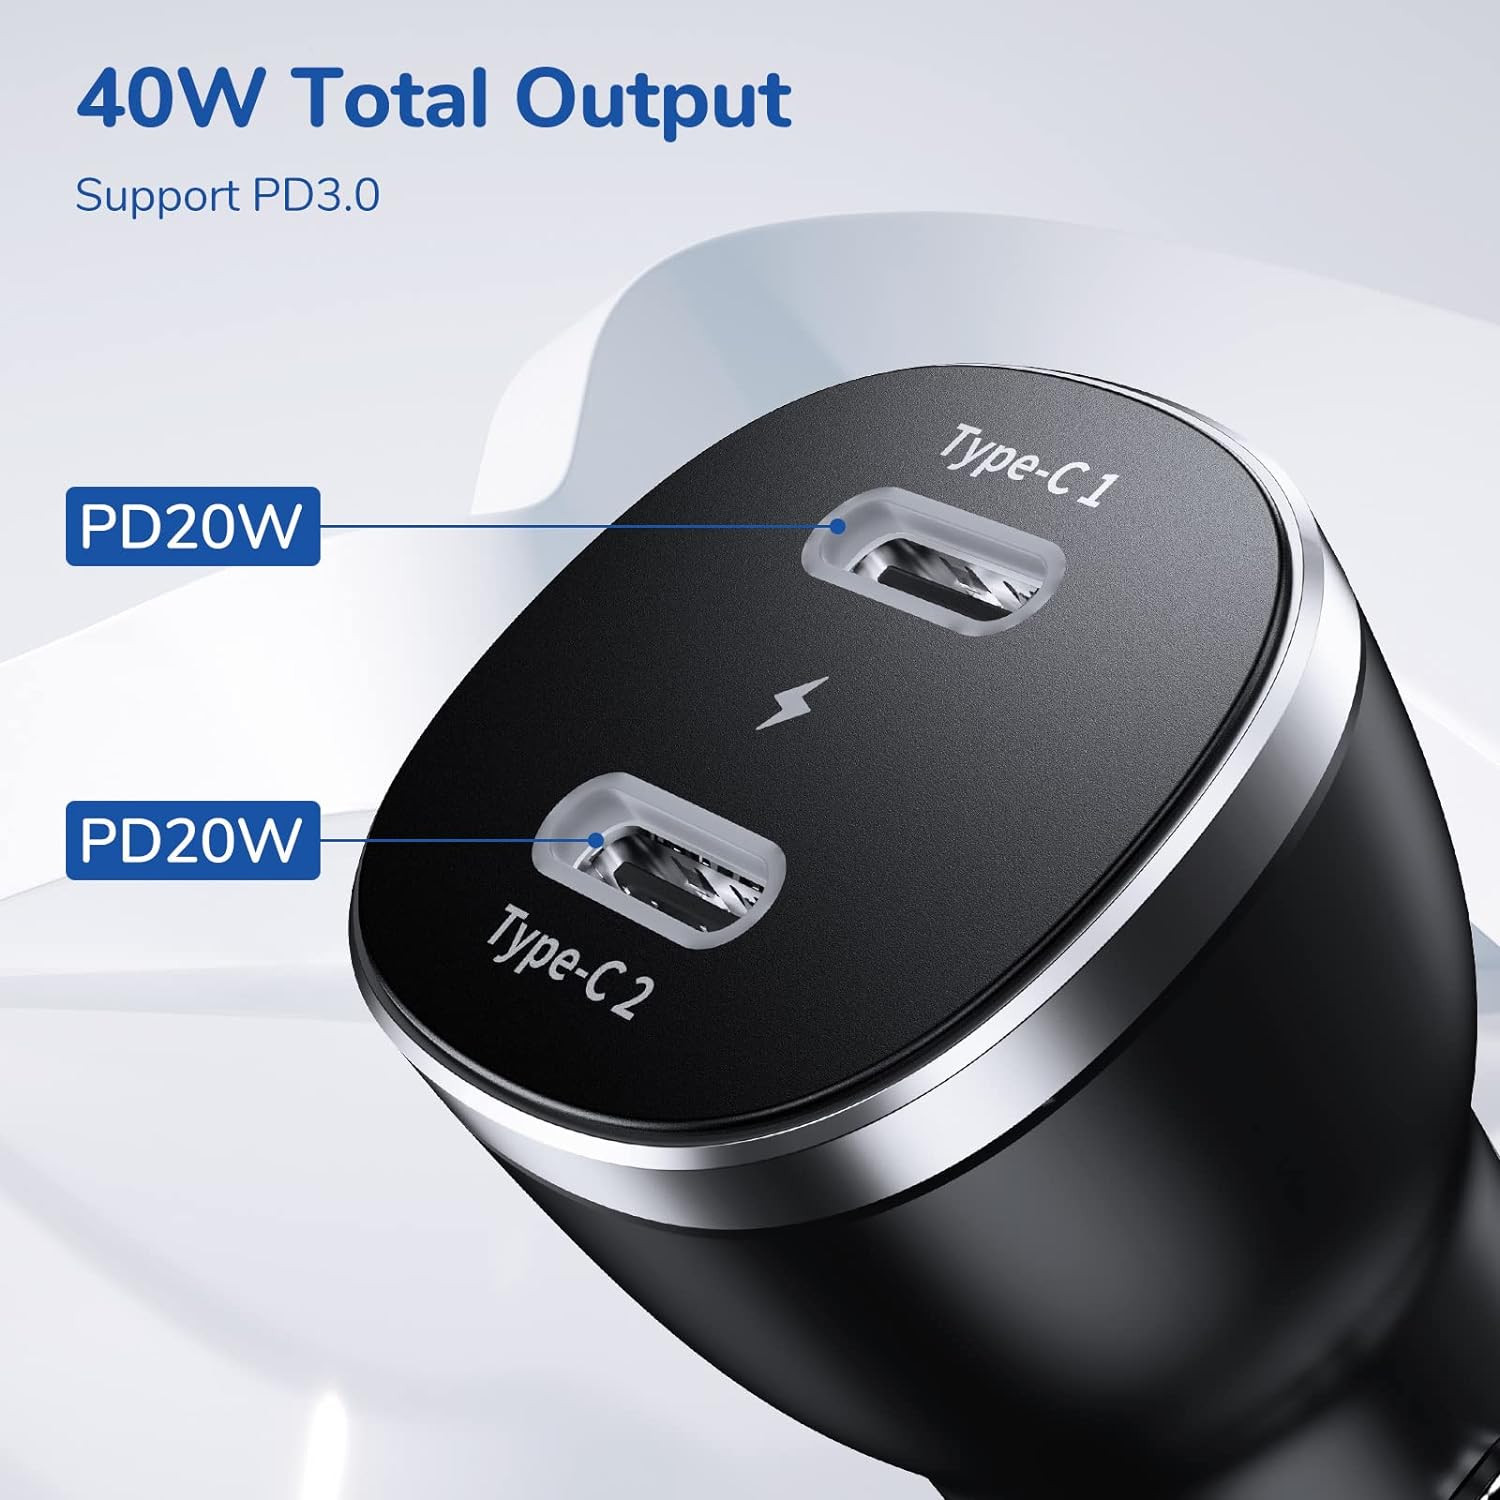 Considering Syncwire USB C Car Charger - 40W 2-Port PD 3.0 Type C Car Charger Adapter